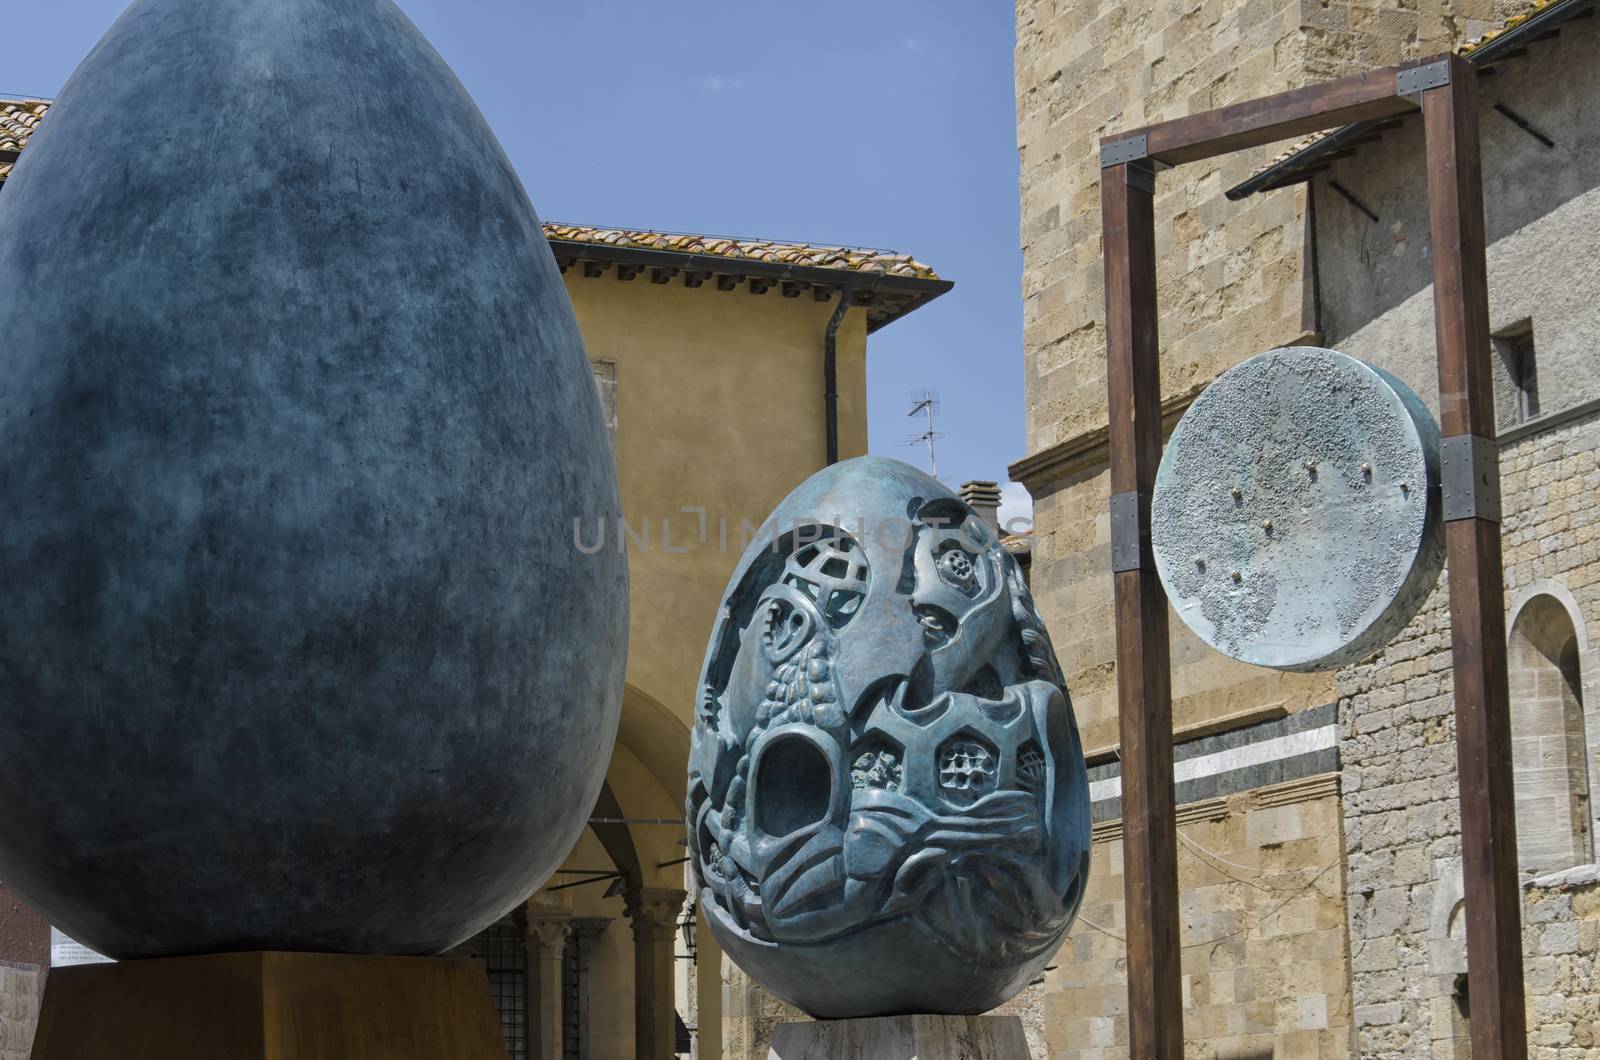 Exhibition of art in the center of Volterra